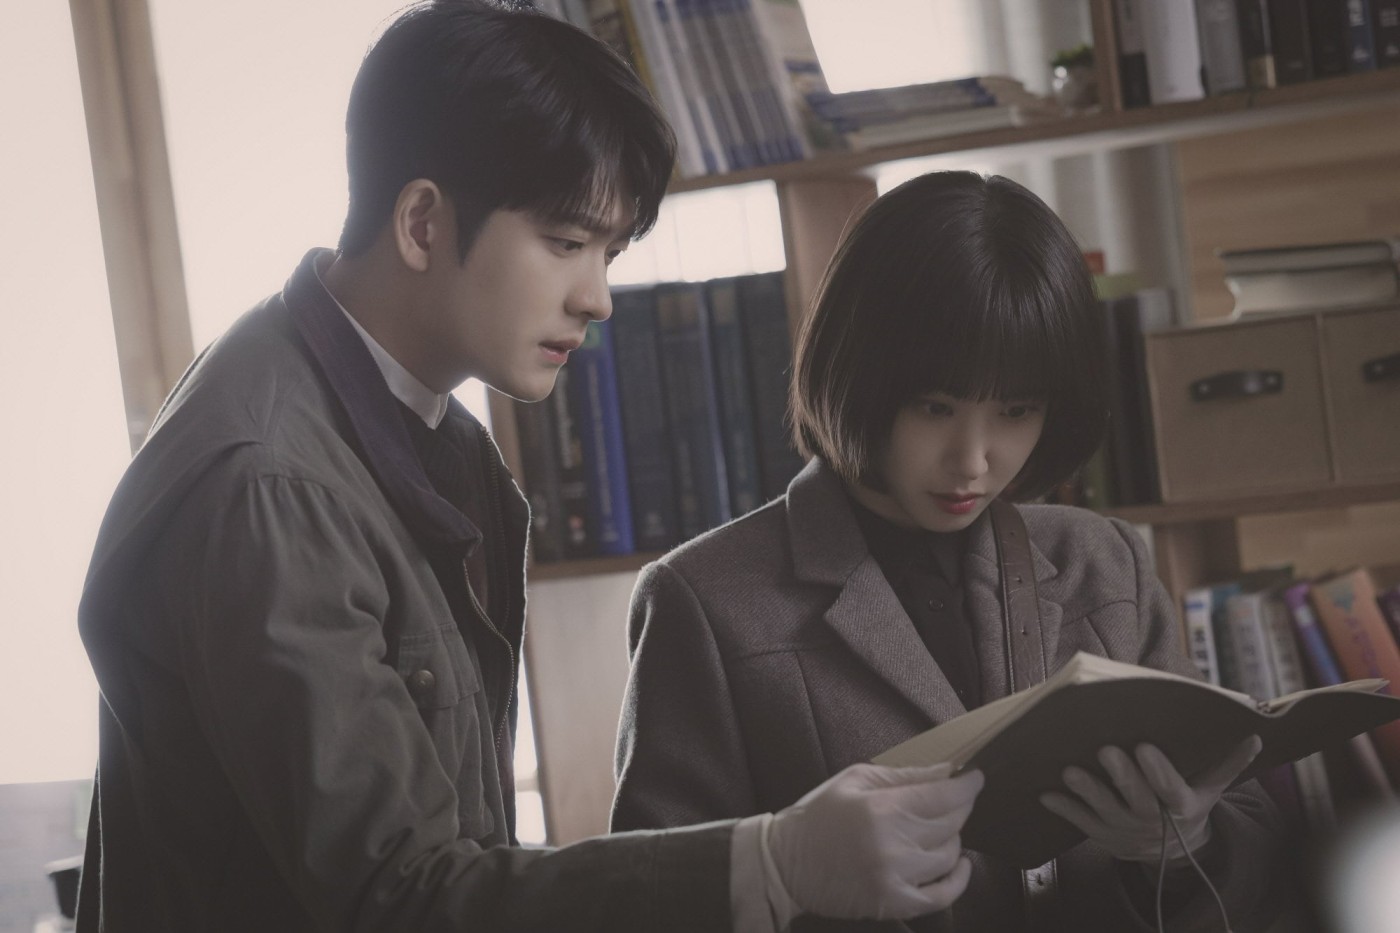 Jun-ho and Attorney Woo reading notes